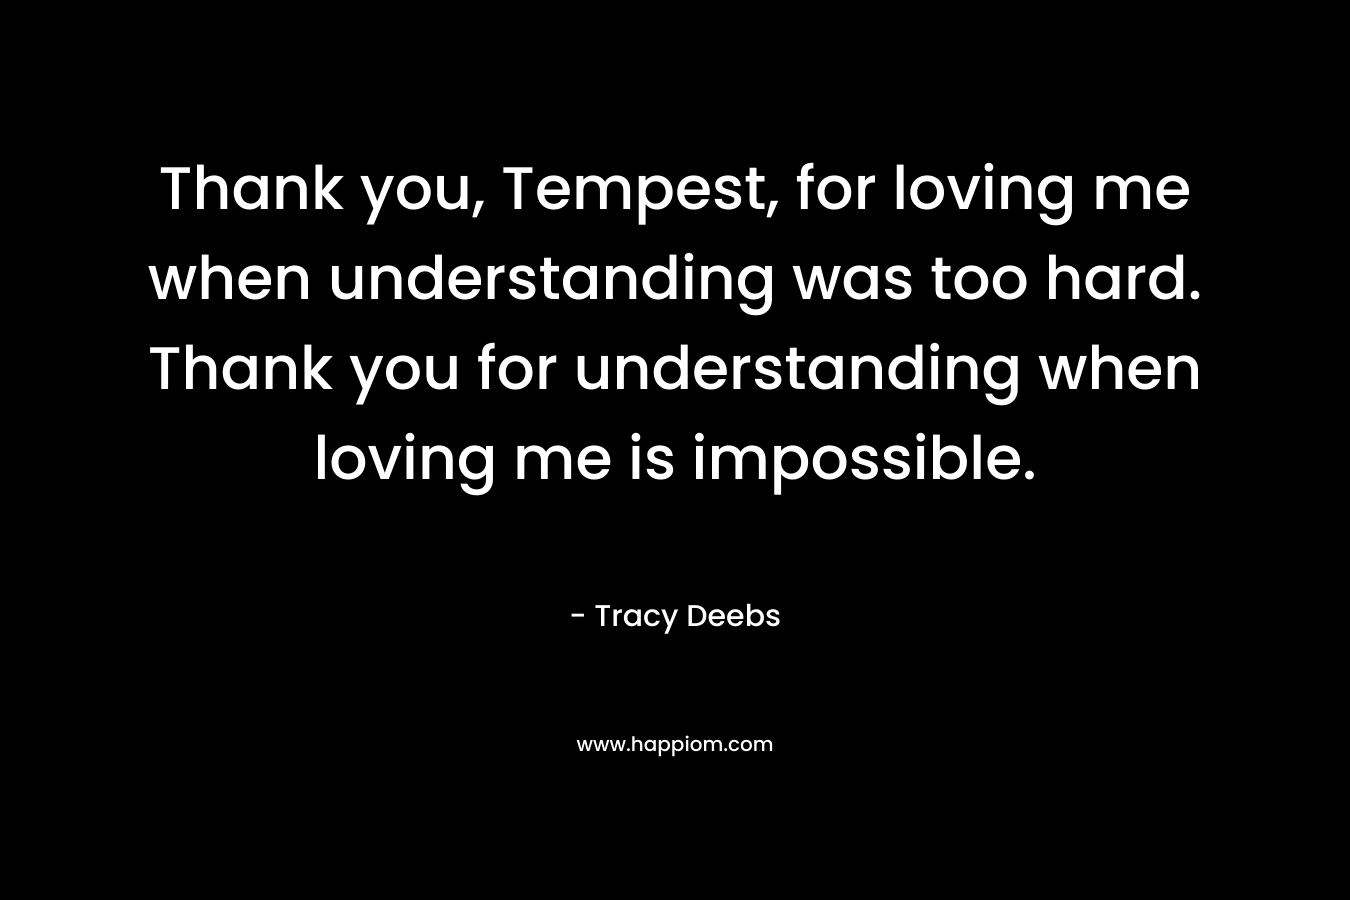 Thank you, Tempest, for loving me when understanding was too hard. Thank you for understanding when loving me is impossible. – Tracy Deebs